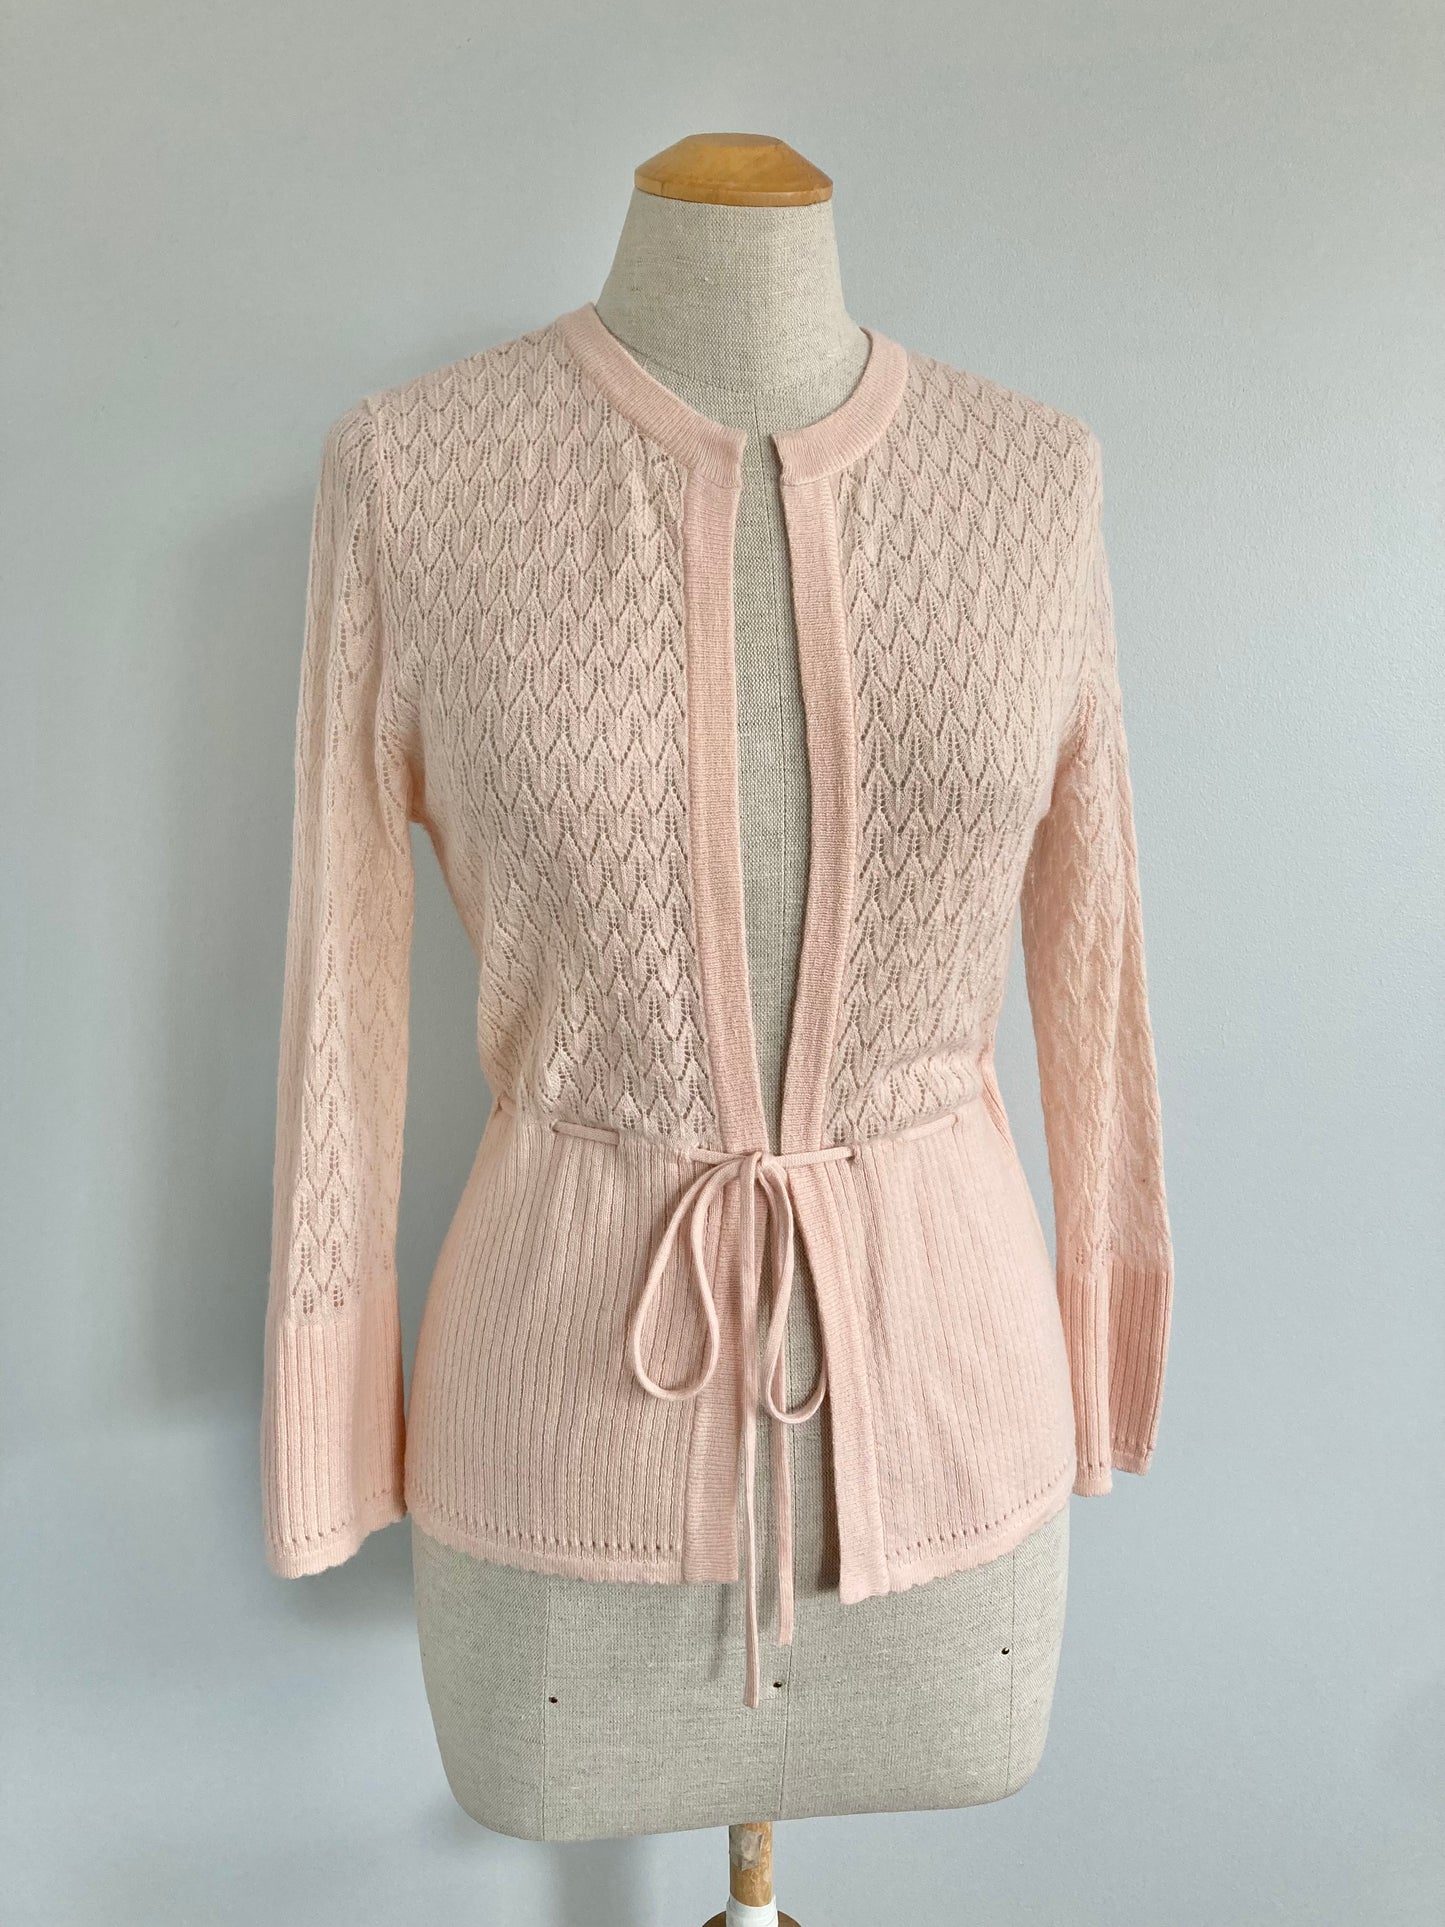 100% Cashmere Lace Sweater, Holt Renfrew Fine Lace Cardigan, Cashmere Spring Sweater, Peachy Pink Cashmere Sweater, Size M